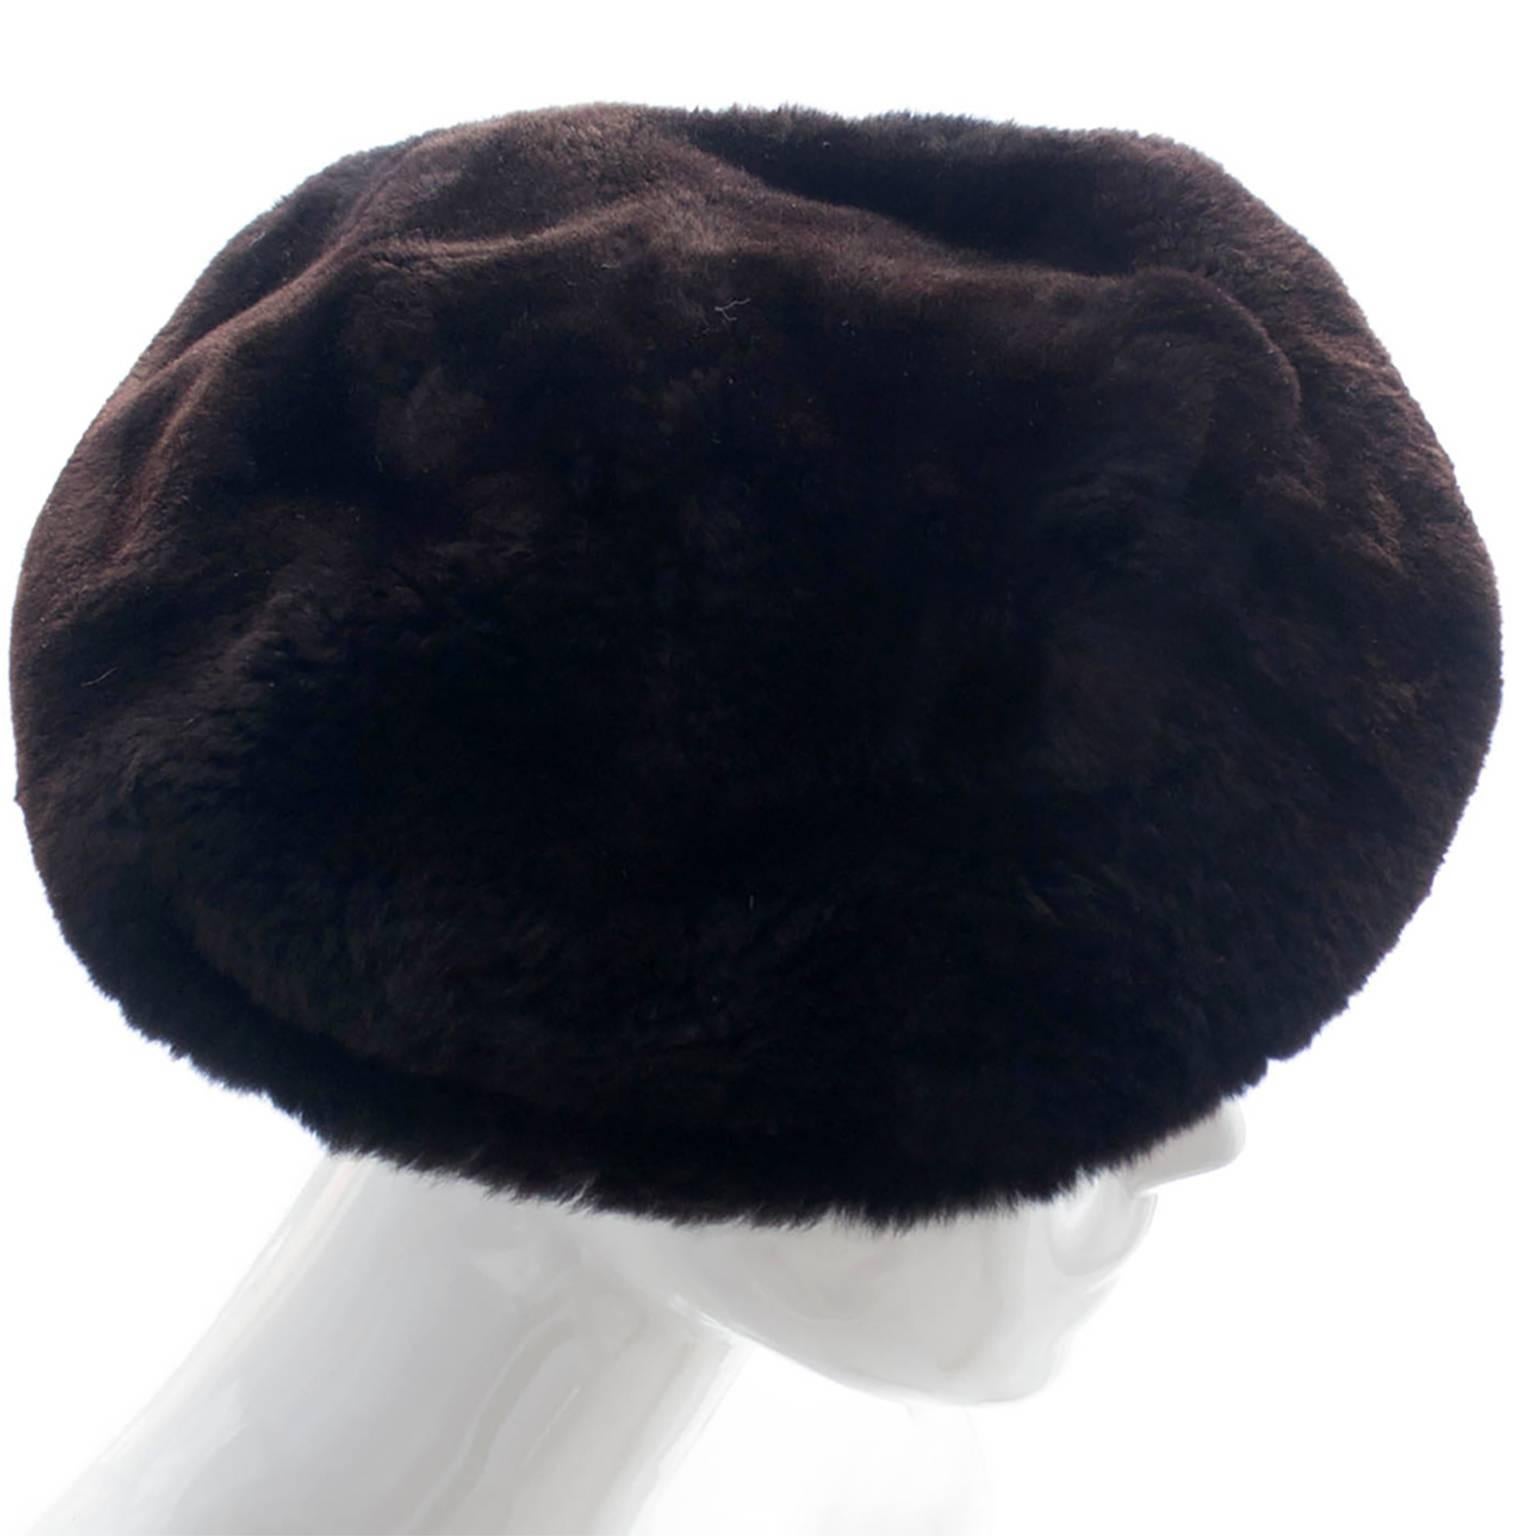 This vintage beret hat is from Irene of New York and was purchased at I Magnin in New York in the 1960's. The hat is a brown sheared mink and is in excellent condition. The inside has a knit band with a circumference of 22 inches. This is another